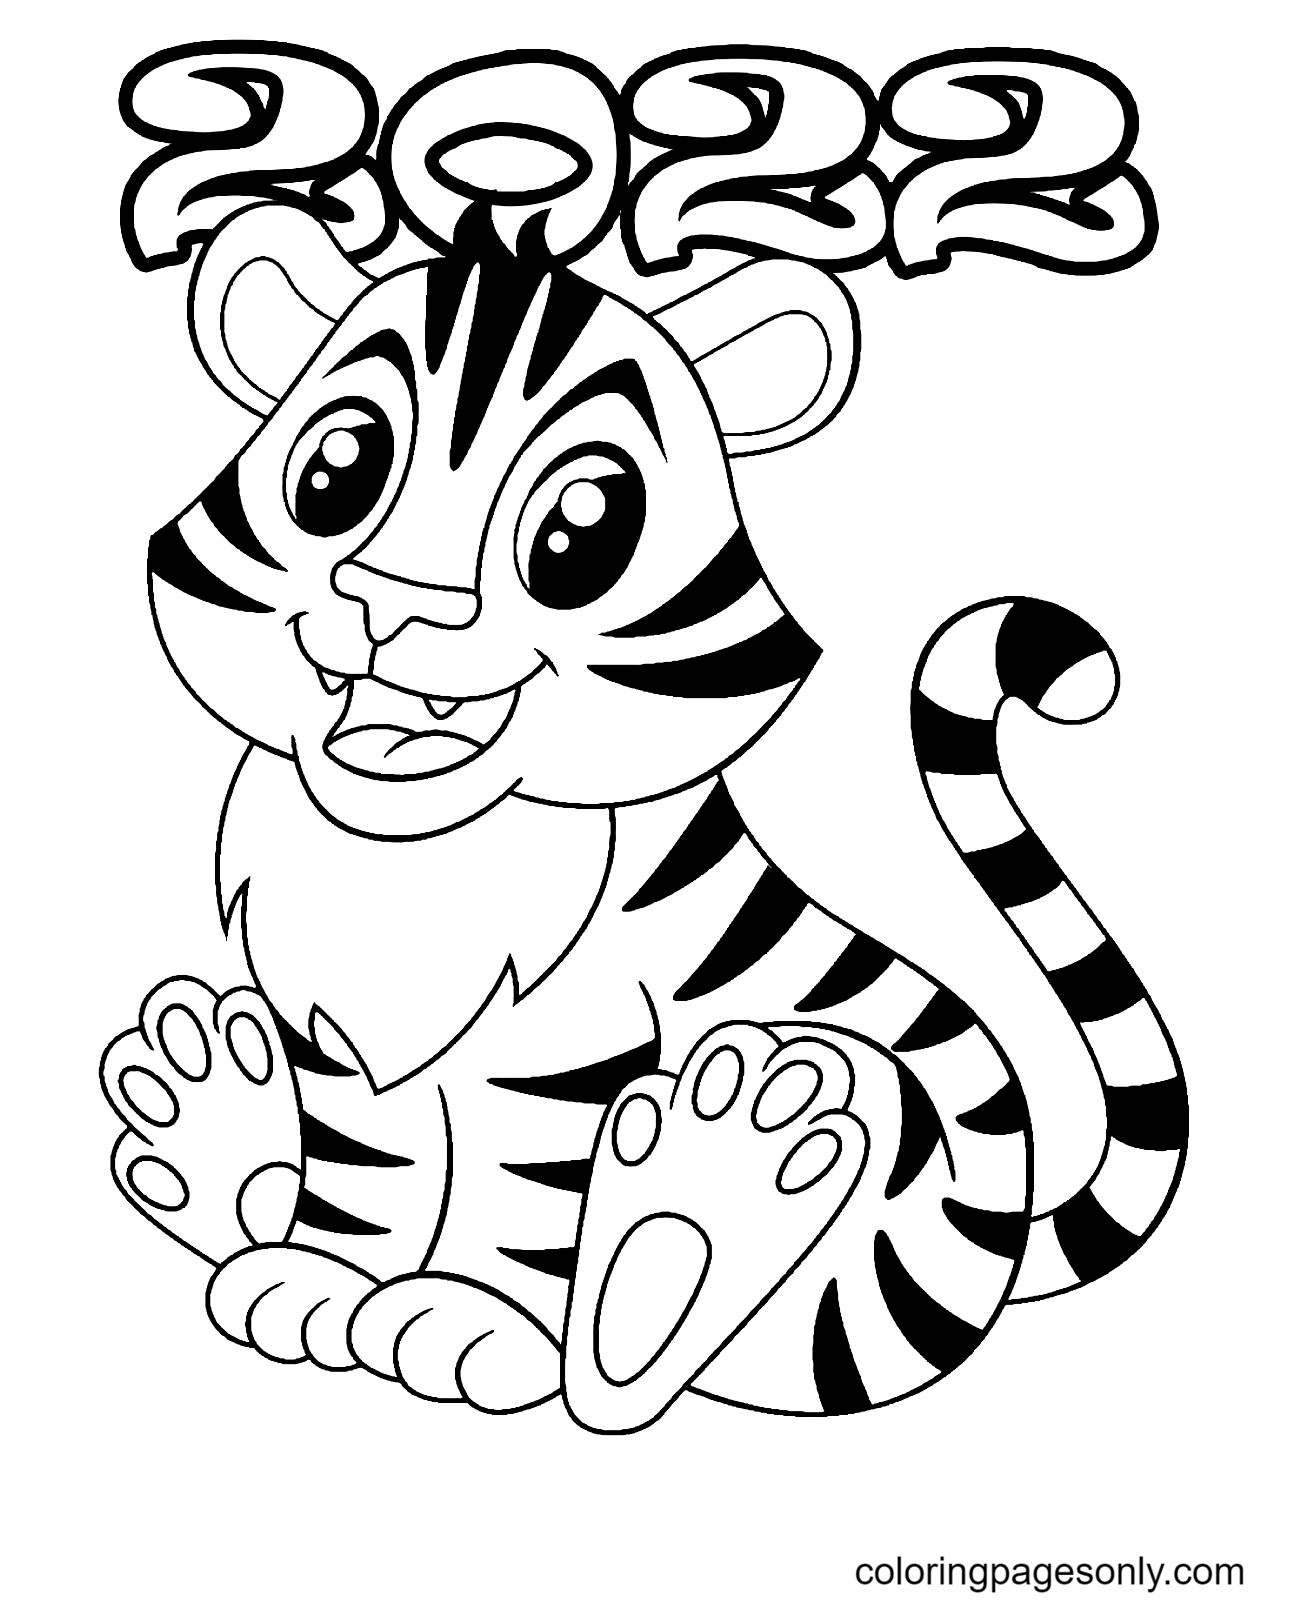 Year 2022 Tiger Coloring Page